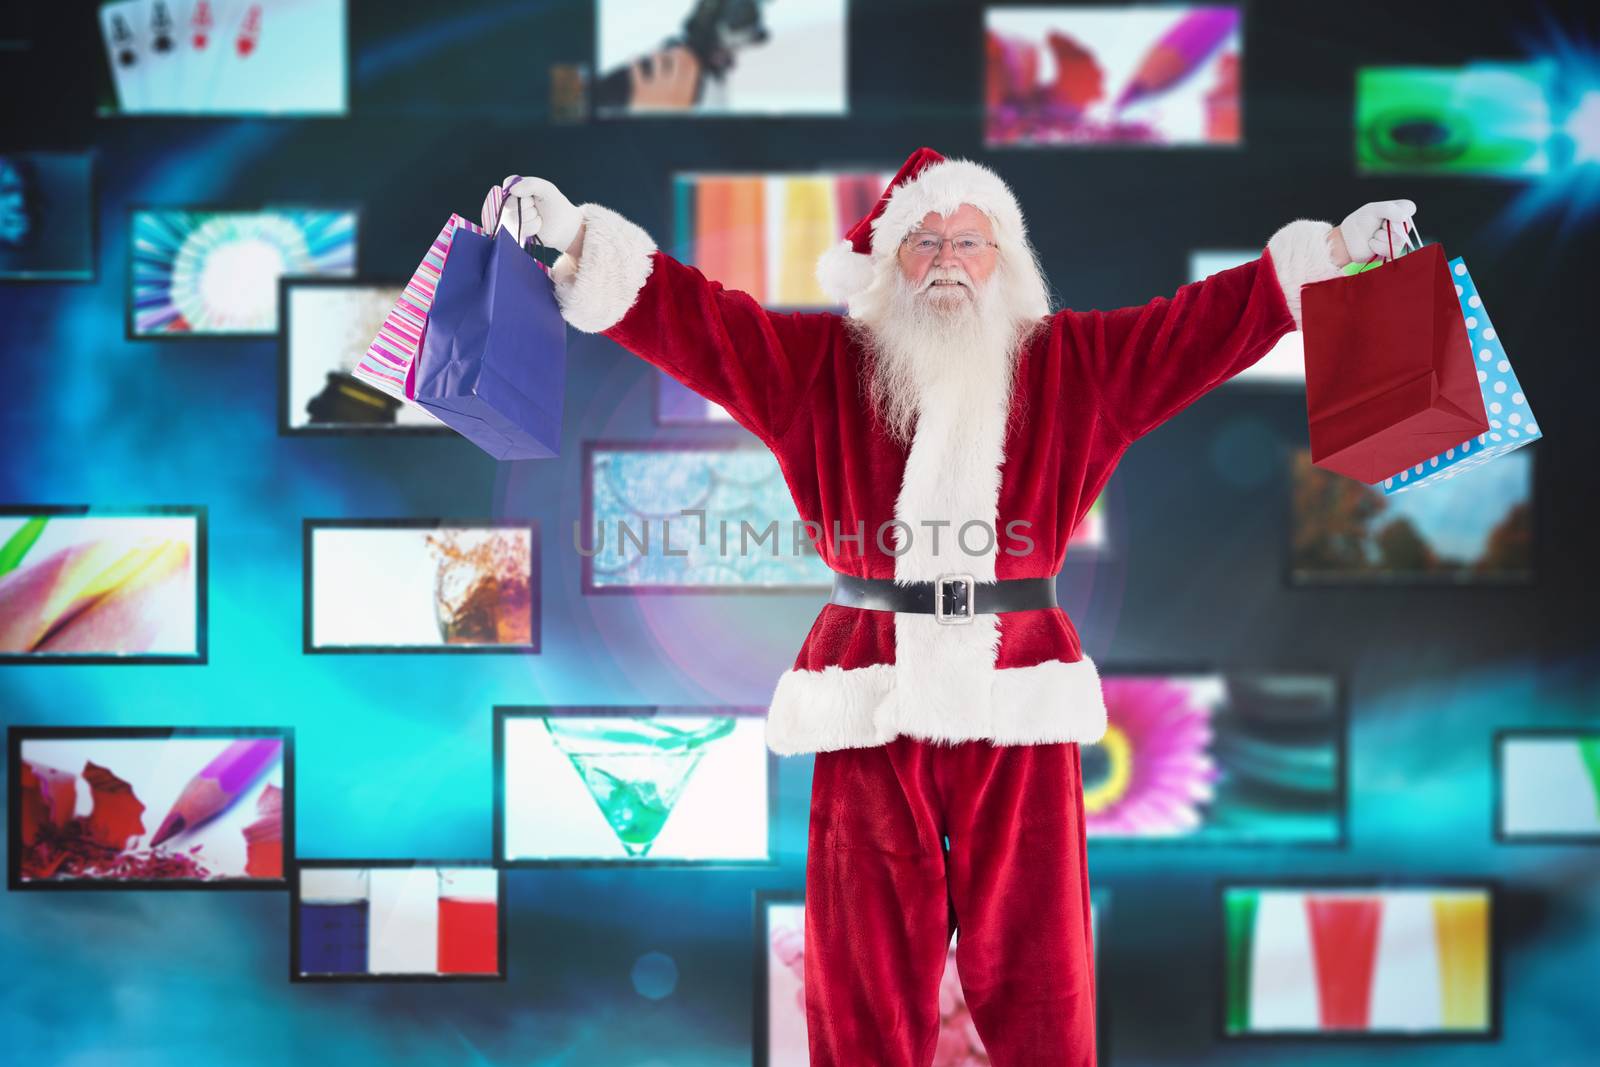 Santa holds some bags for Chistmas against screen collage showing lifestyle images